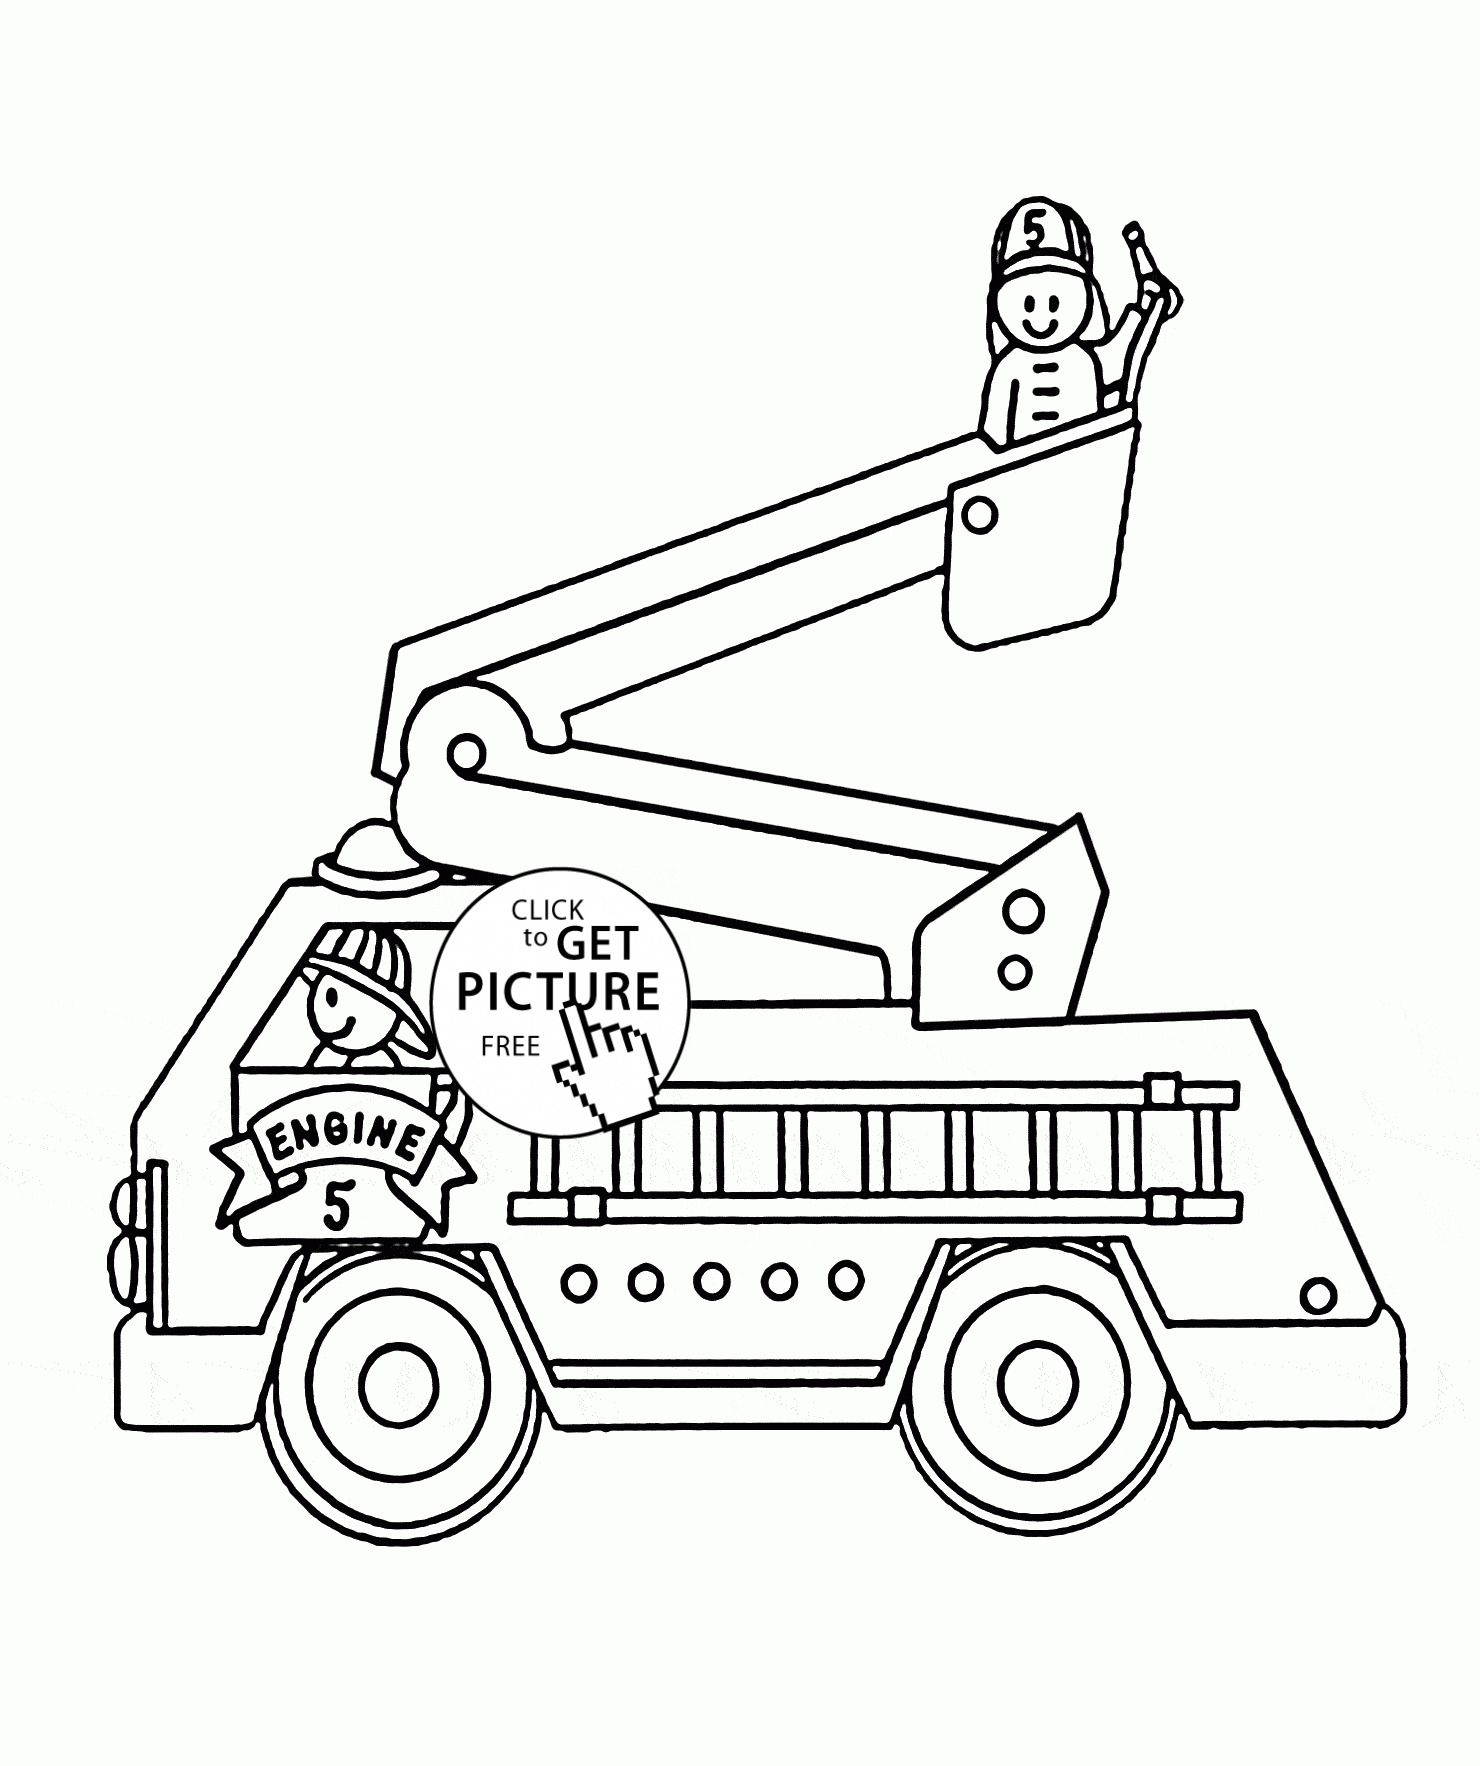 fire truck pictures coloring pages fire truck coloring pages to download and print for free pages truck fire coloring pictures 